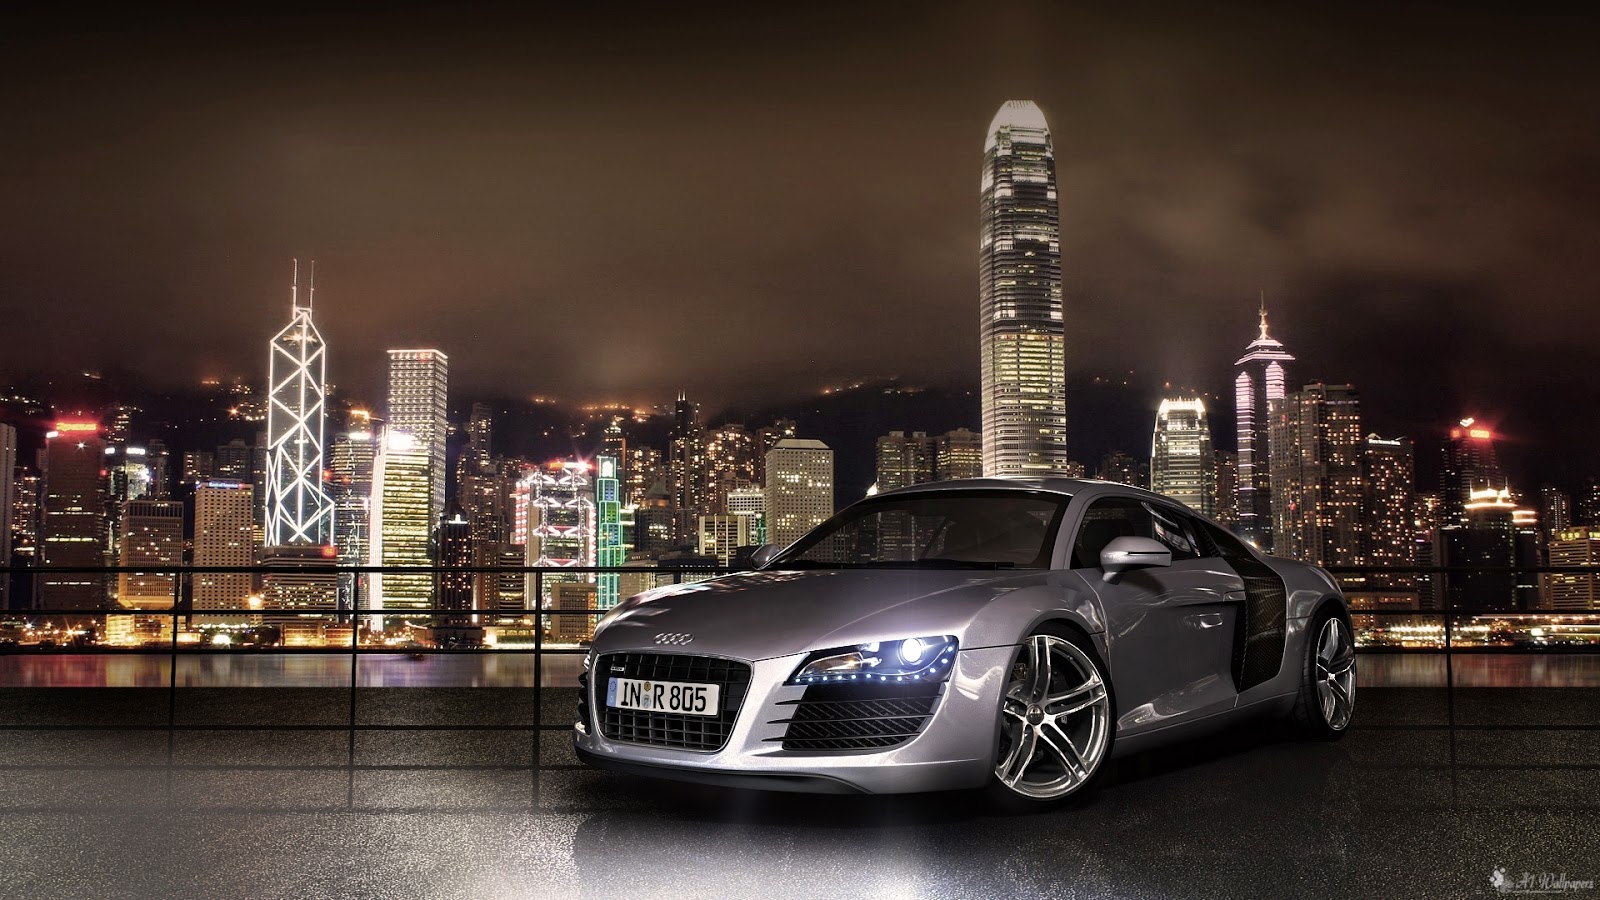 20 Fantastic CARS Wallpapers HD for Desktop Computer & Android ...